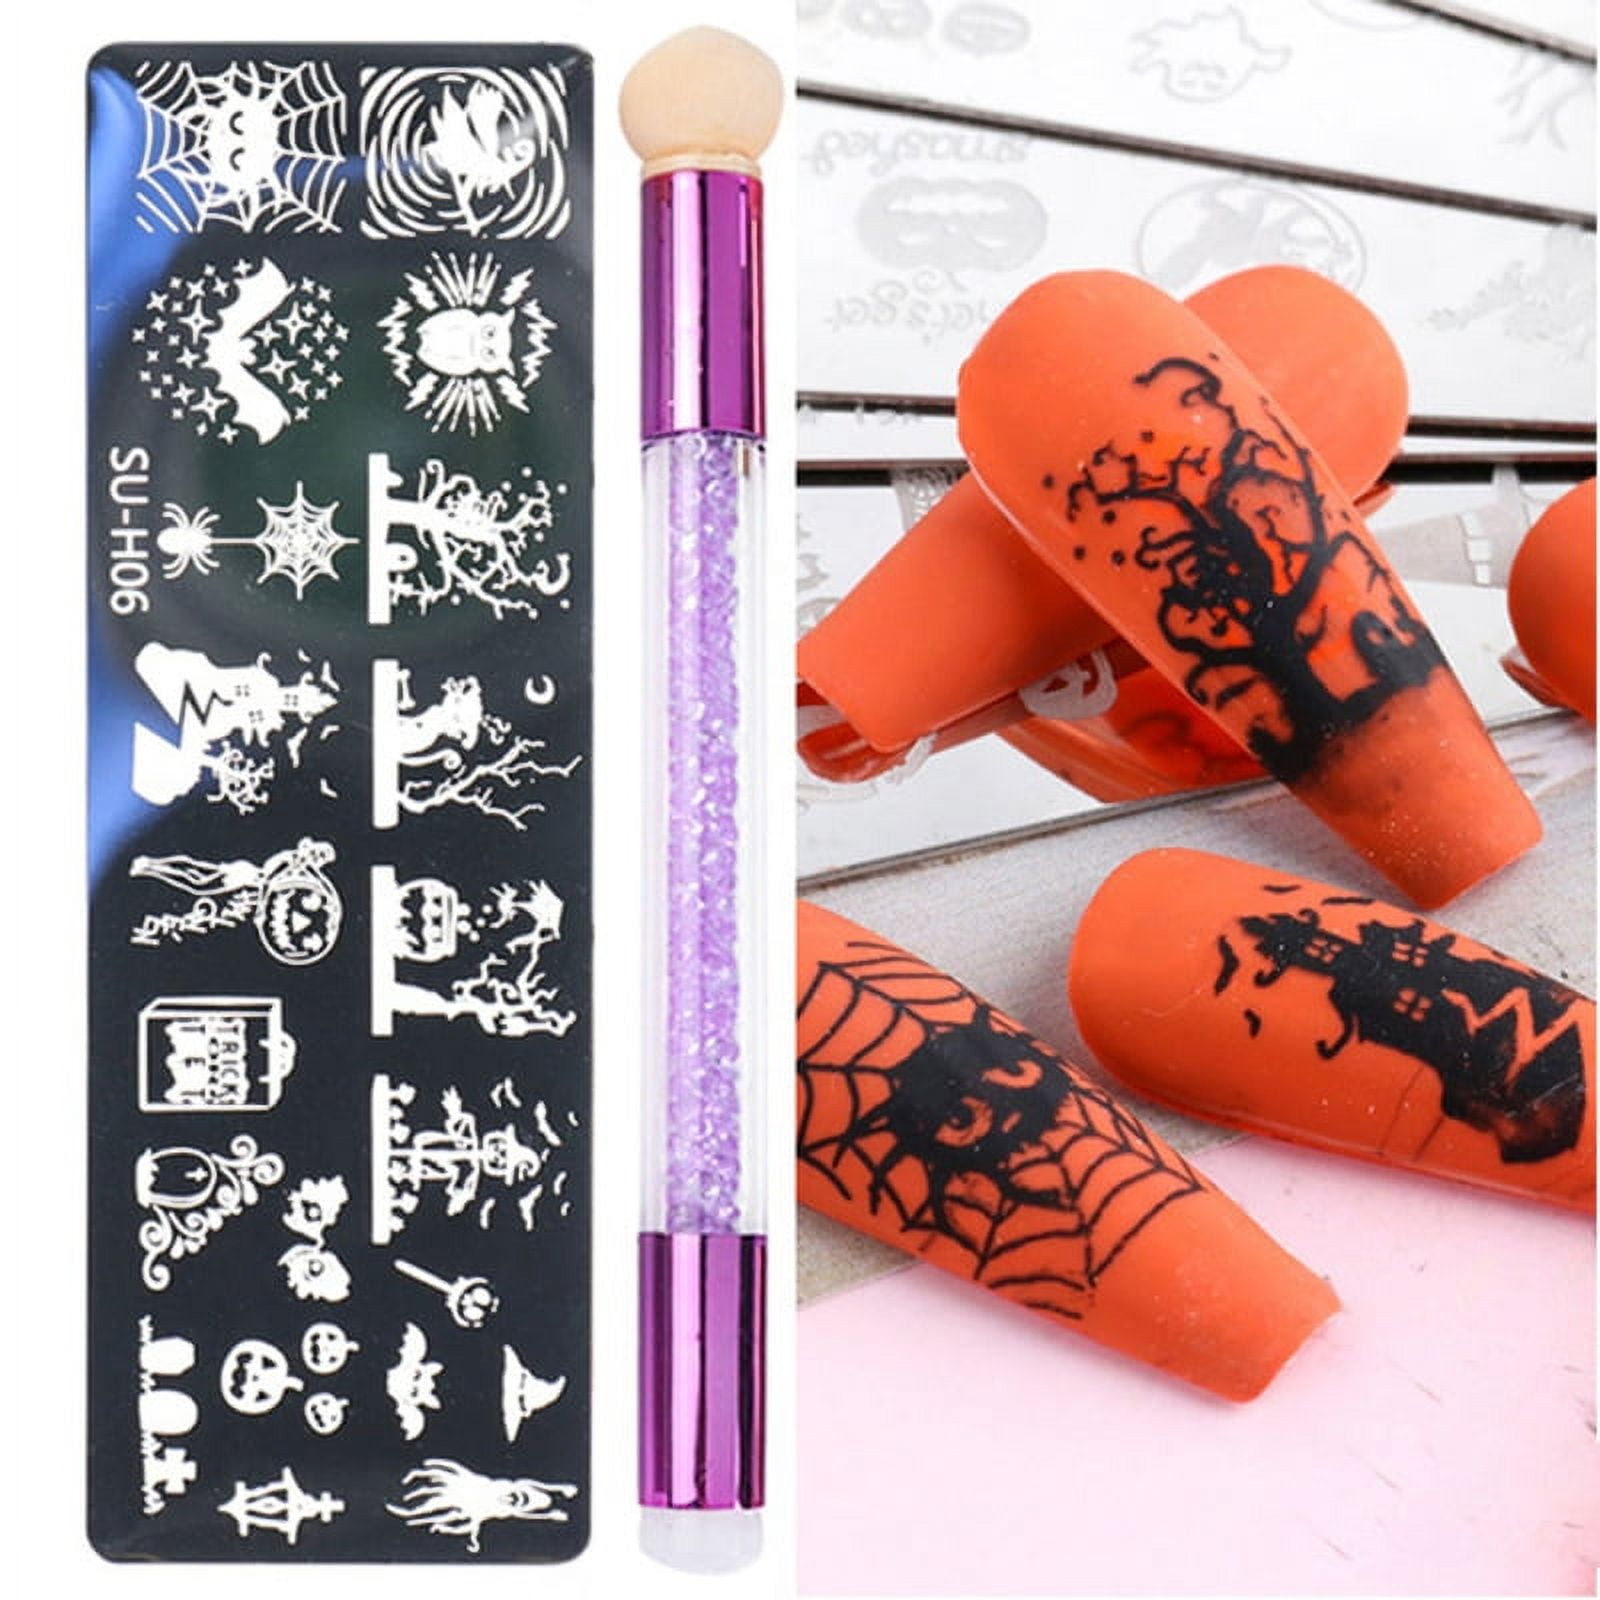 Lifestyle-You Nail Stamping Kit with 5 Rectangular Image plates - Price in  India, Buy Lifestyle-You Nail Stamping Kit with 5 Rectangular Image plates  Online In India, Reviews, Ratings & Features | Flipkart.com